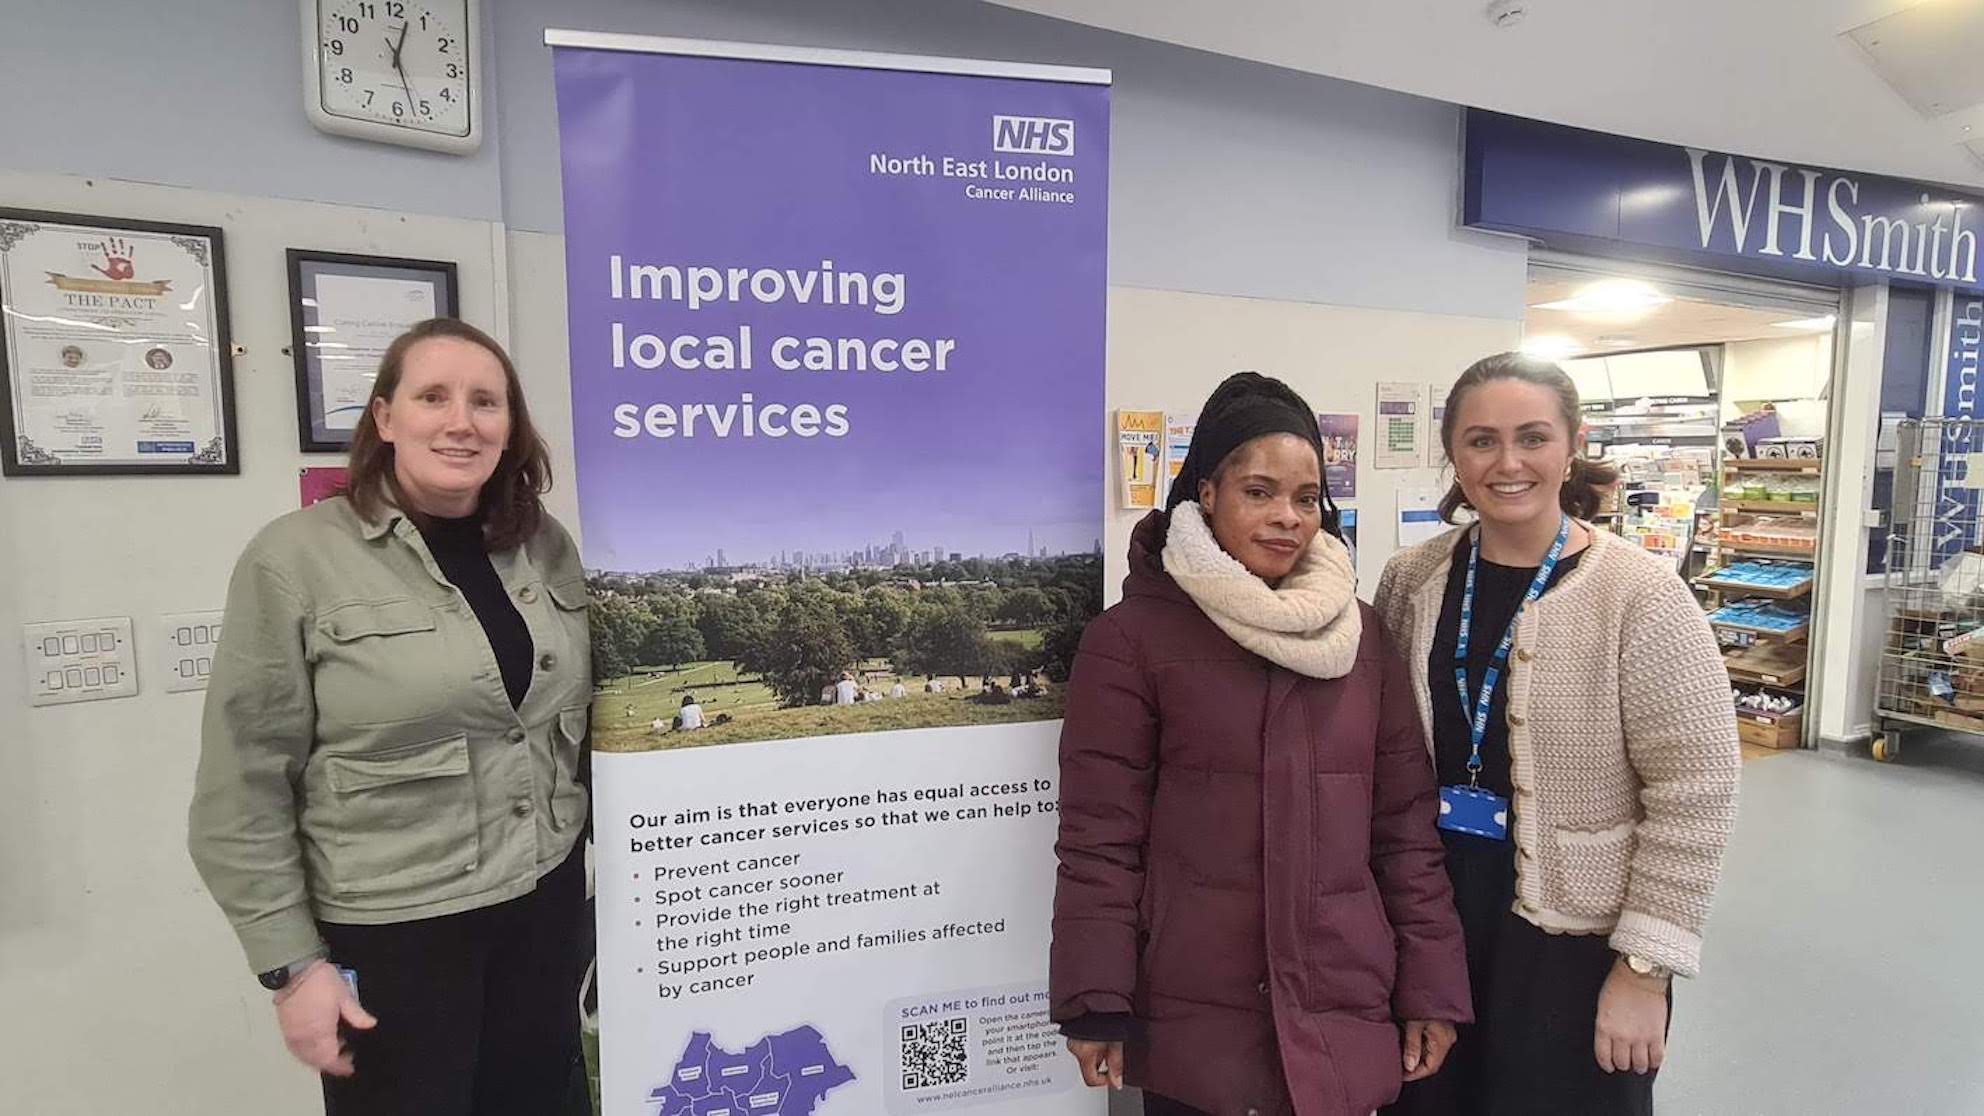 Three ladies are standing by a pop-up banner which says 'Improving local cancer services' on it